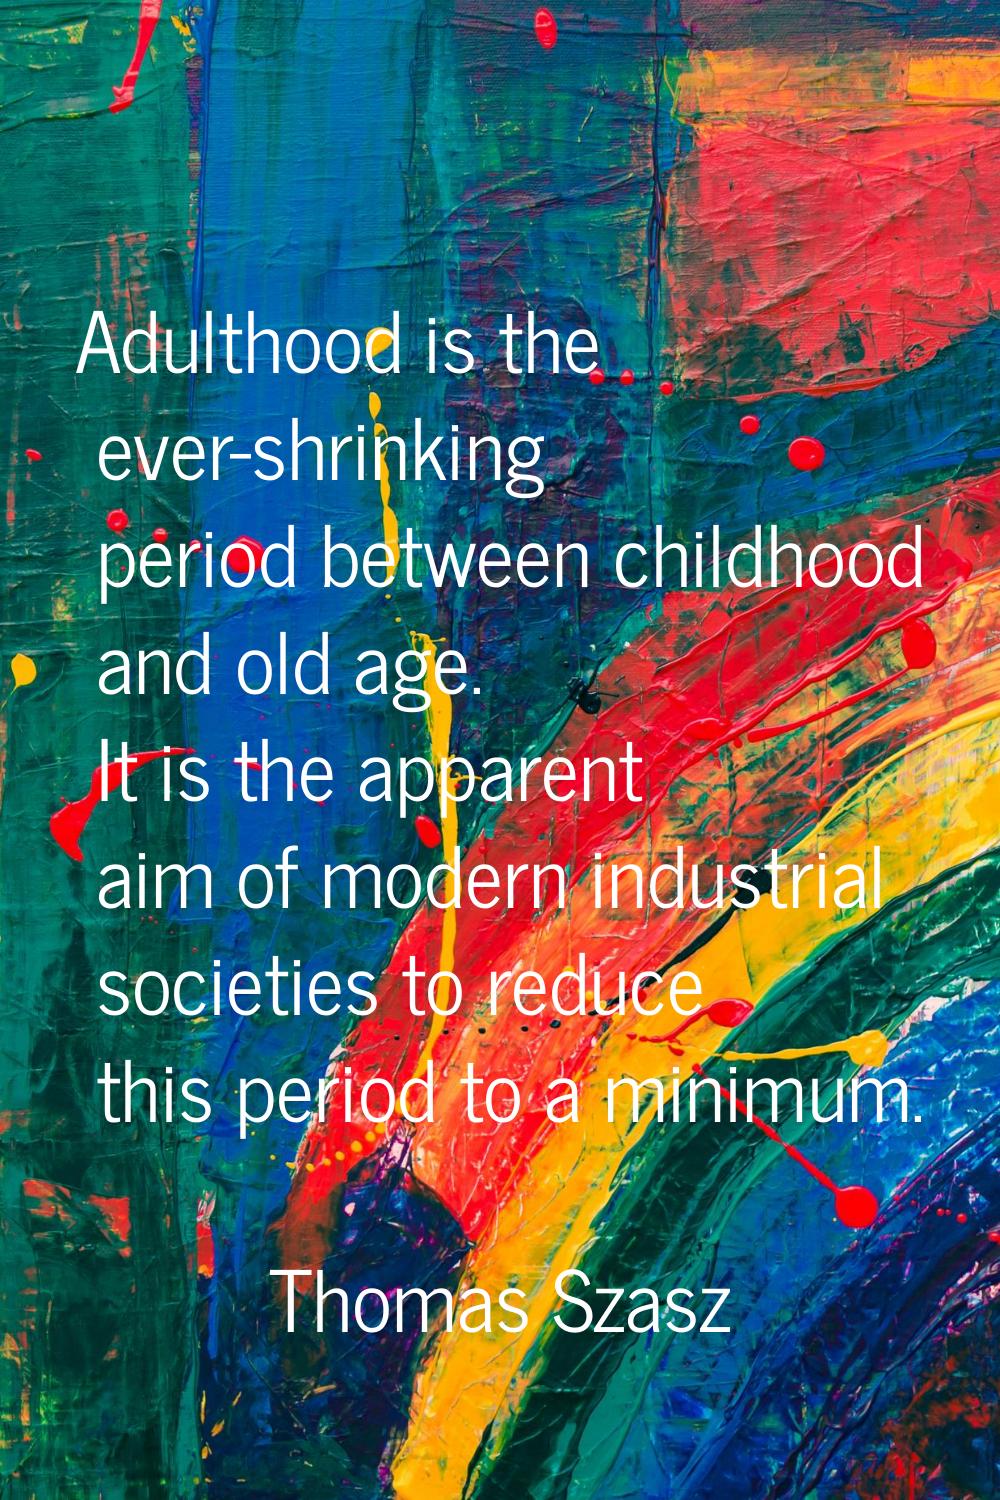 Adulthood is the ever-shrinking period between childhood and old age. It is the apparent aim of mod